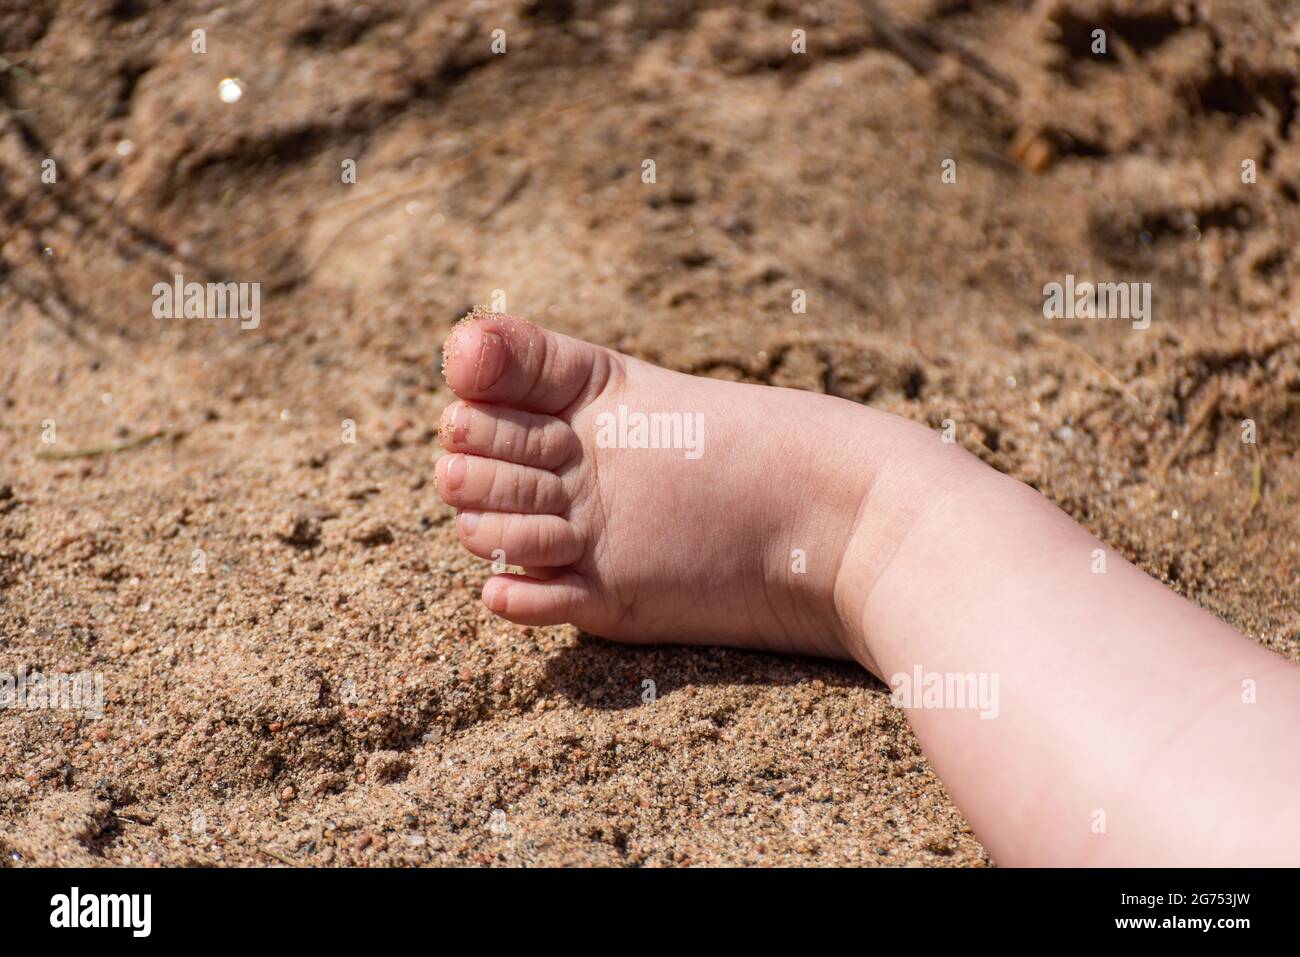 a baby foot in the sand Stock Photo